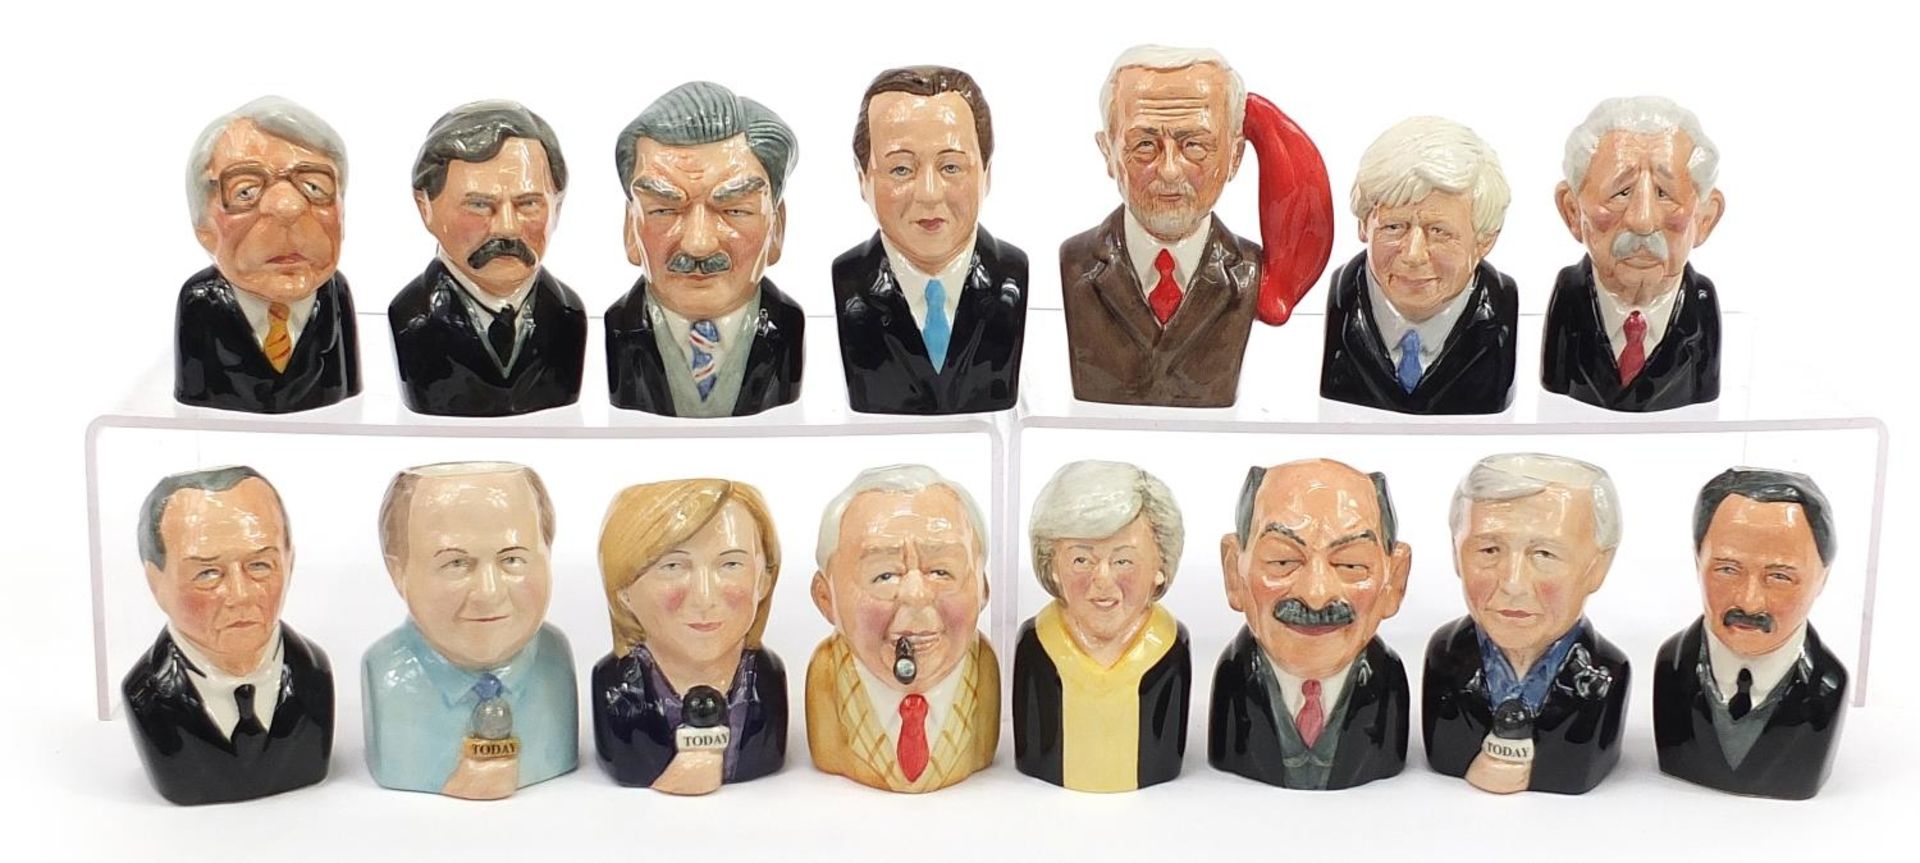 Collection of Bairstow Manor collectable character jugs, mostly political interest including